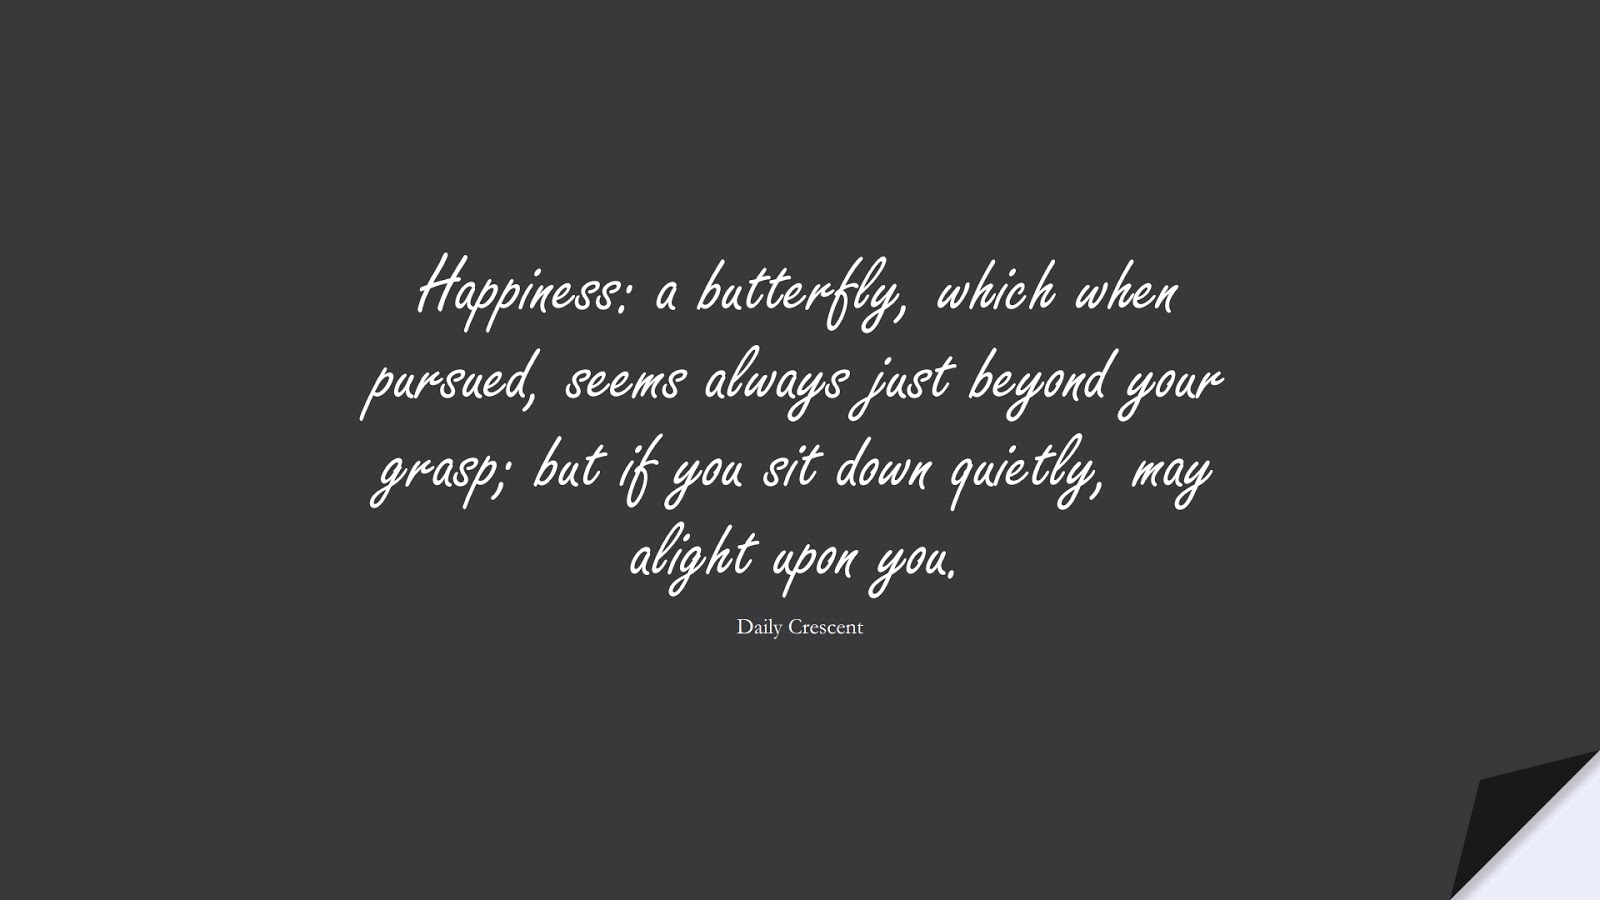 Happiness: a butterfly, which when pursued, seems always just beyond your grasp; but if you sit down quietly, may alight upon you. (Daily Crescent);  #HappinessQuotes